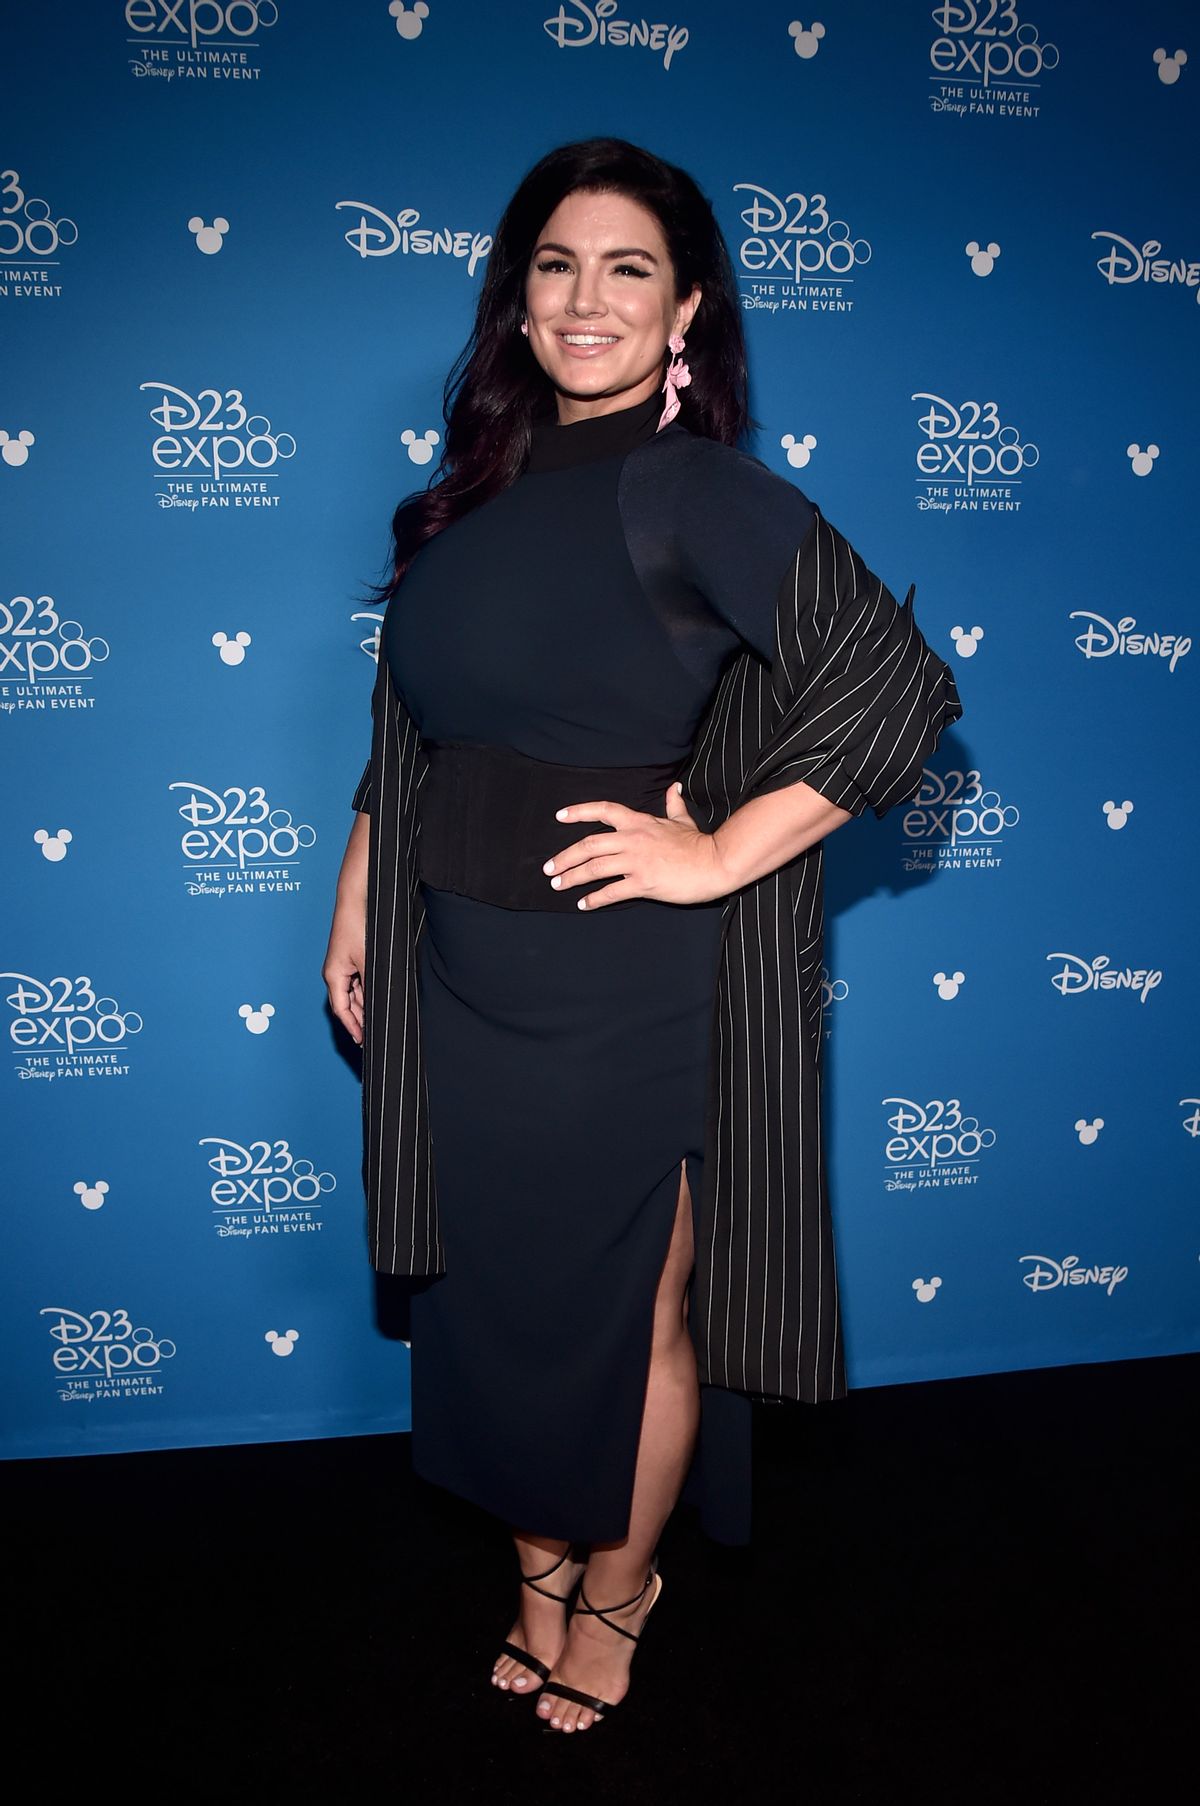 ANAHEIM, CALIFORNIA - AUGUST 23: Gina Carano of 'The Mandalorian' took part today in the Disney+ Showcase at Disney’s D23 EXPO 2019 in Anaheim, Calif.  'The Mandalorian' will stream exclusively on Disney+, which launches November 12. (Photo by Alberto E. Rodriguez/Getty Images for Disney) (Alberto E. Rodriguez/Getty Images for Disney)